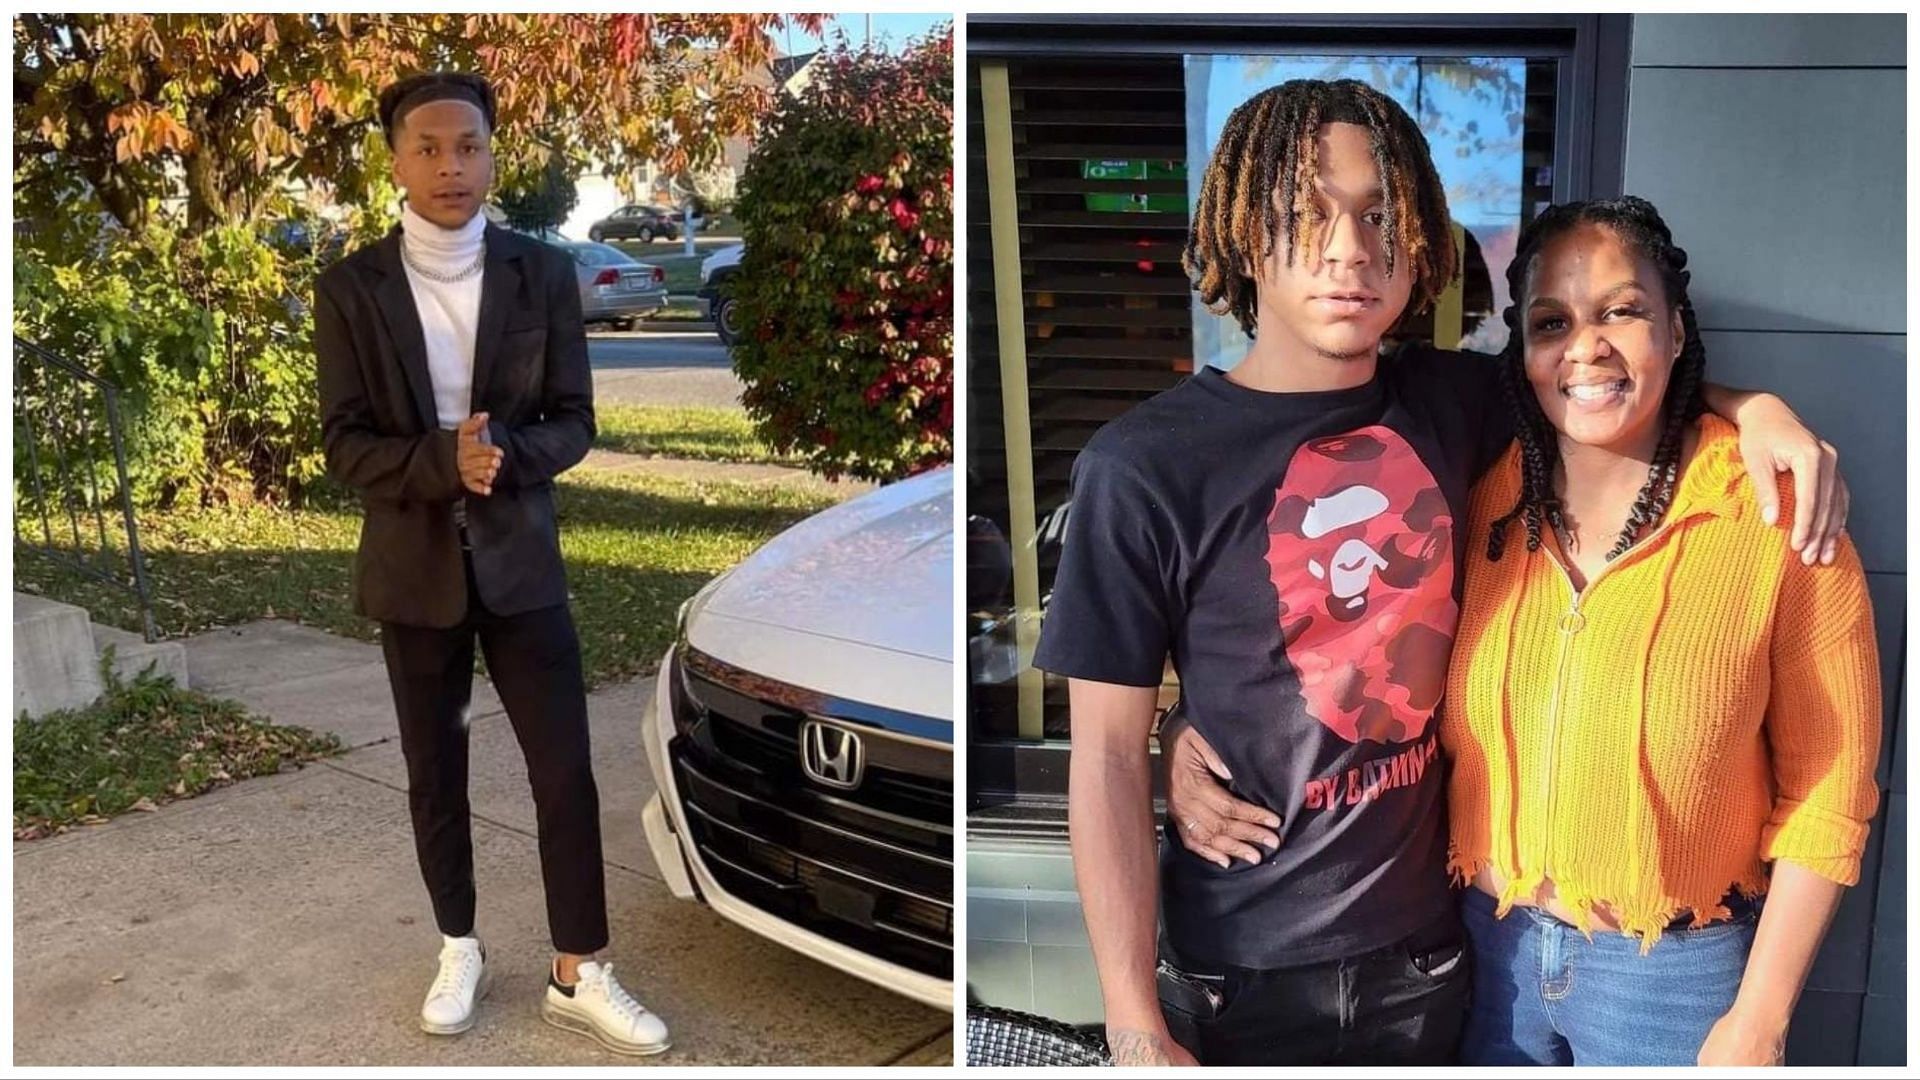 Keontae Harper who was allegedly shot in the head by a friend while playing with firearms, died on Tuesday, (Images via Michael Harper &amp; Katrice Loveshersonkeontae Harper/Facebook)